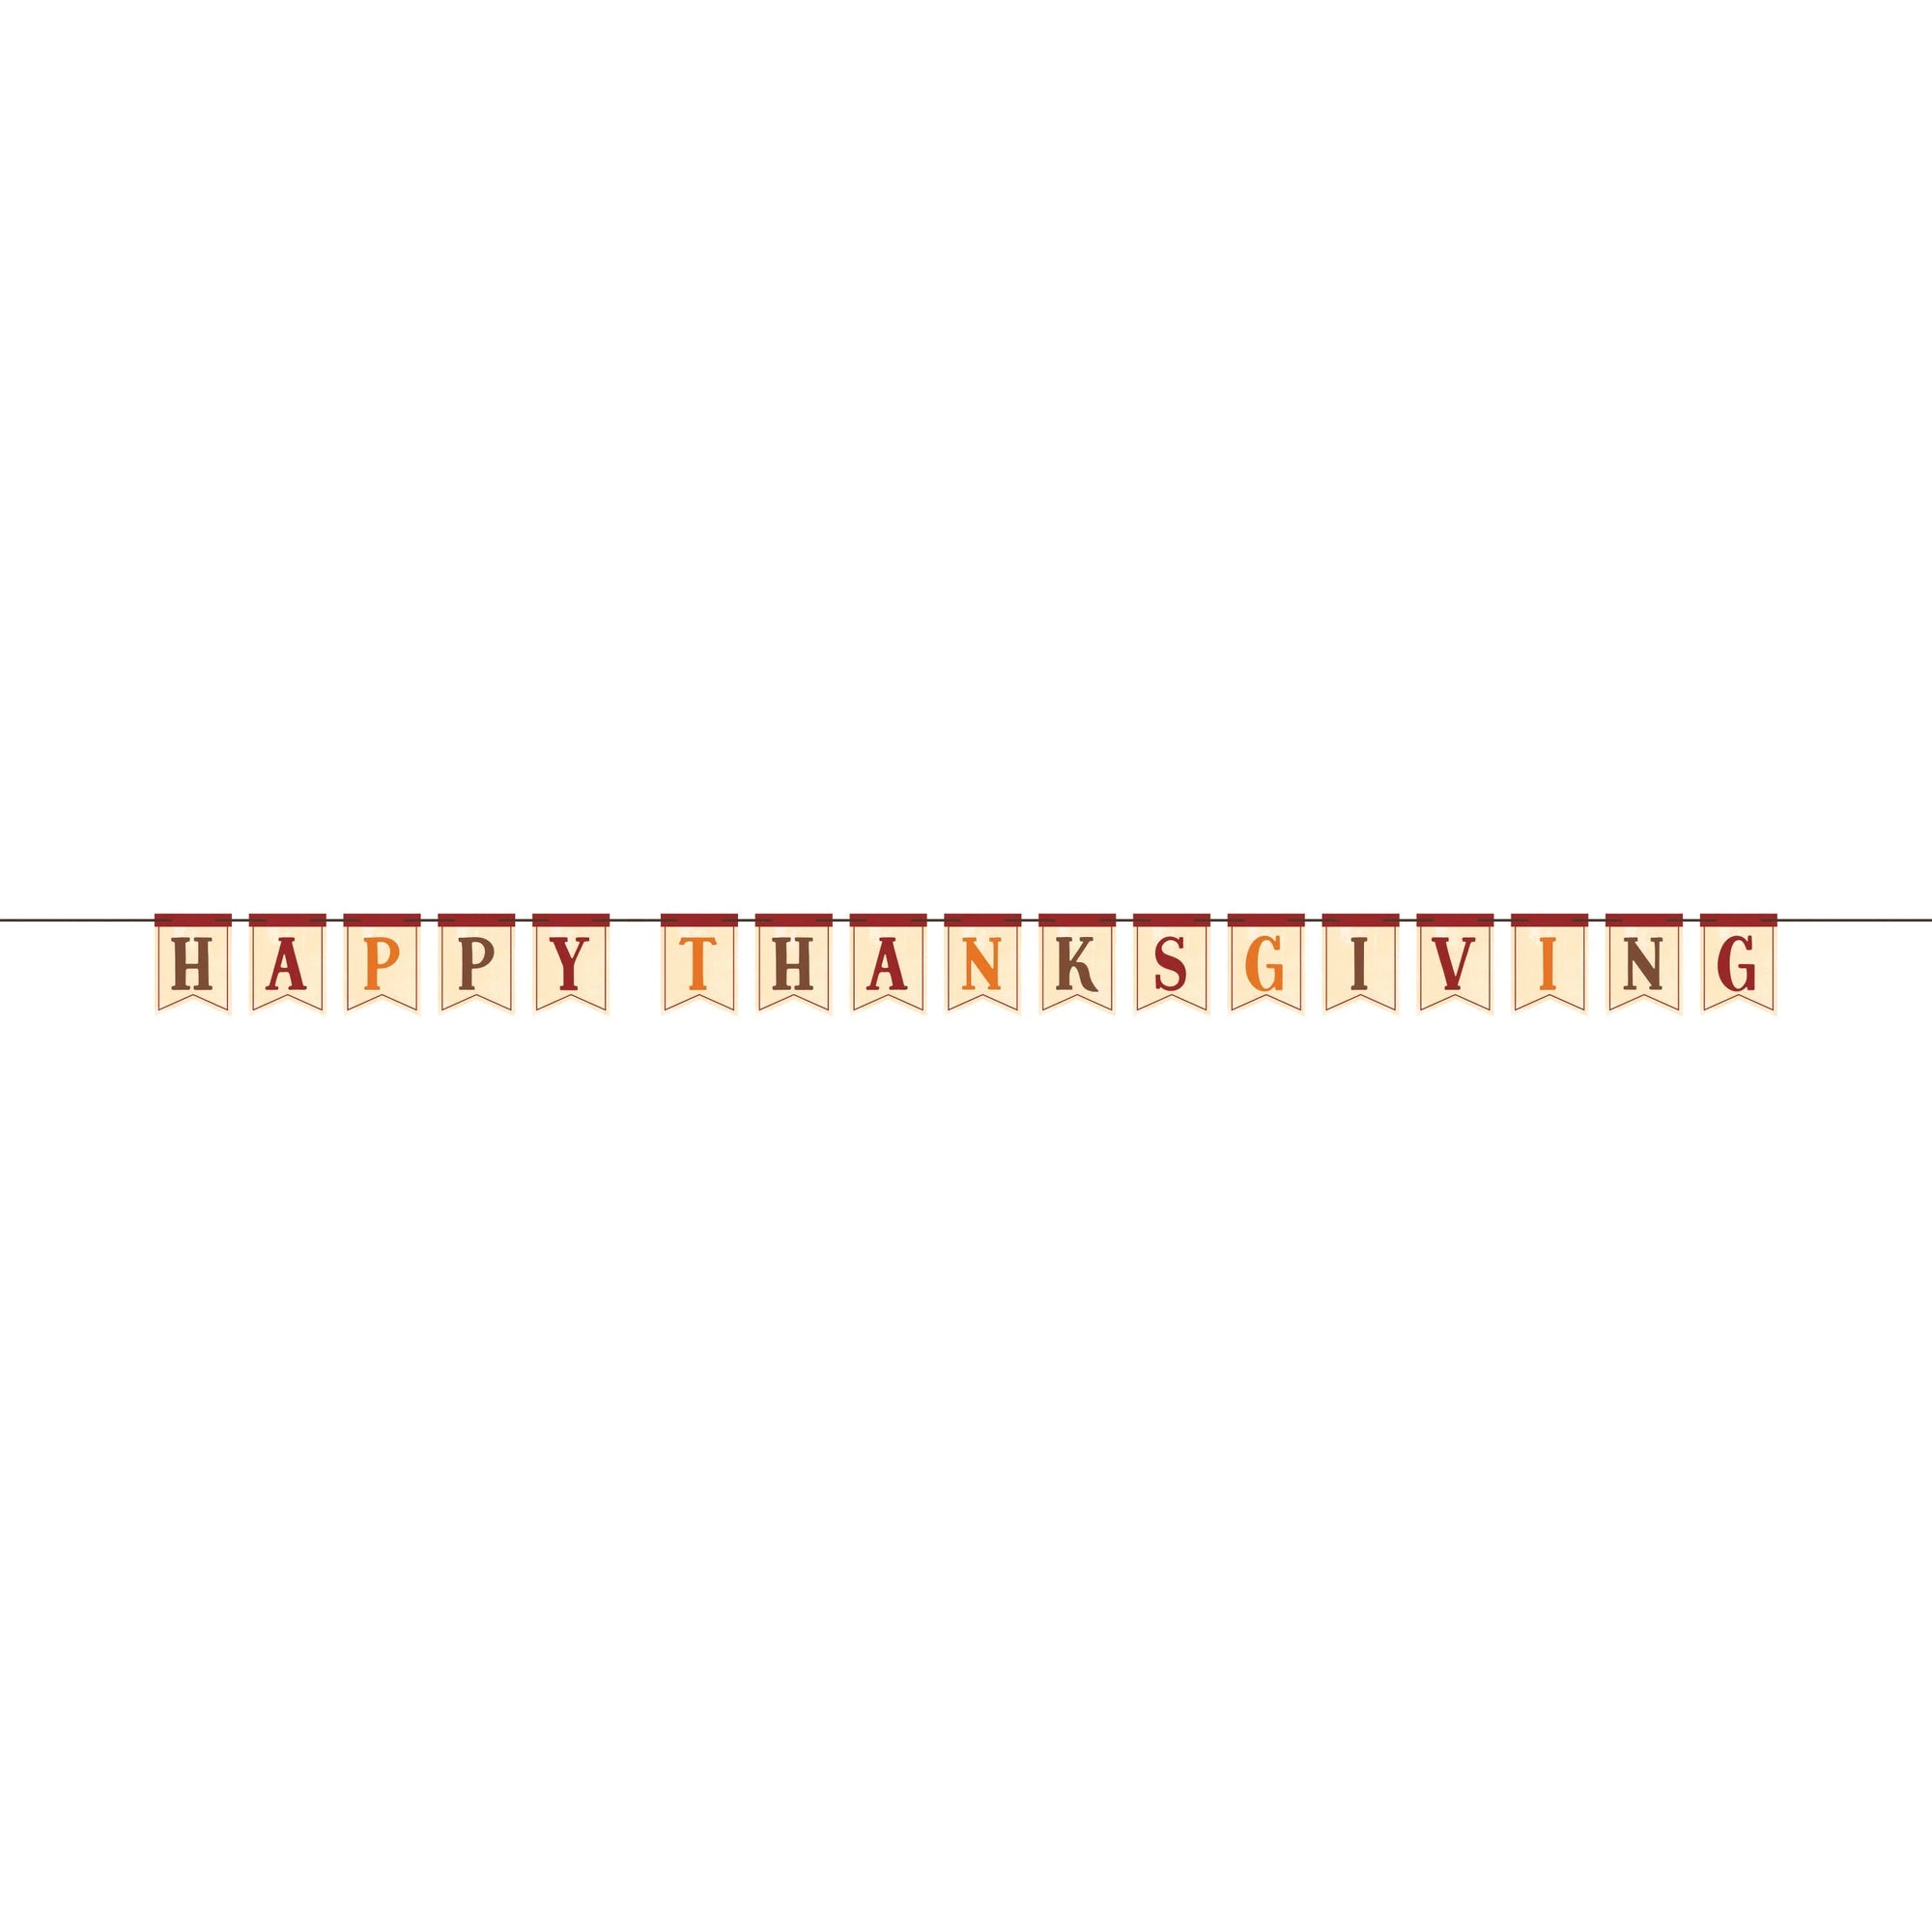 Happy Thankgiving Ribbon Banner Shaped by Creative Converting